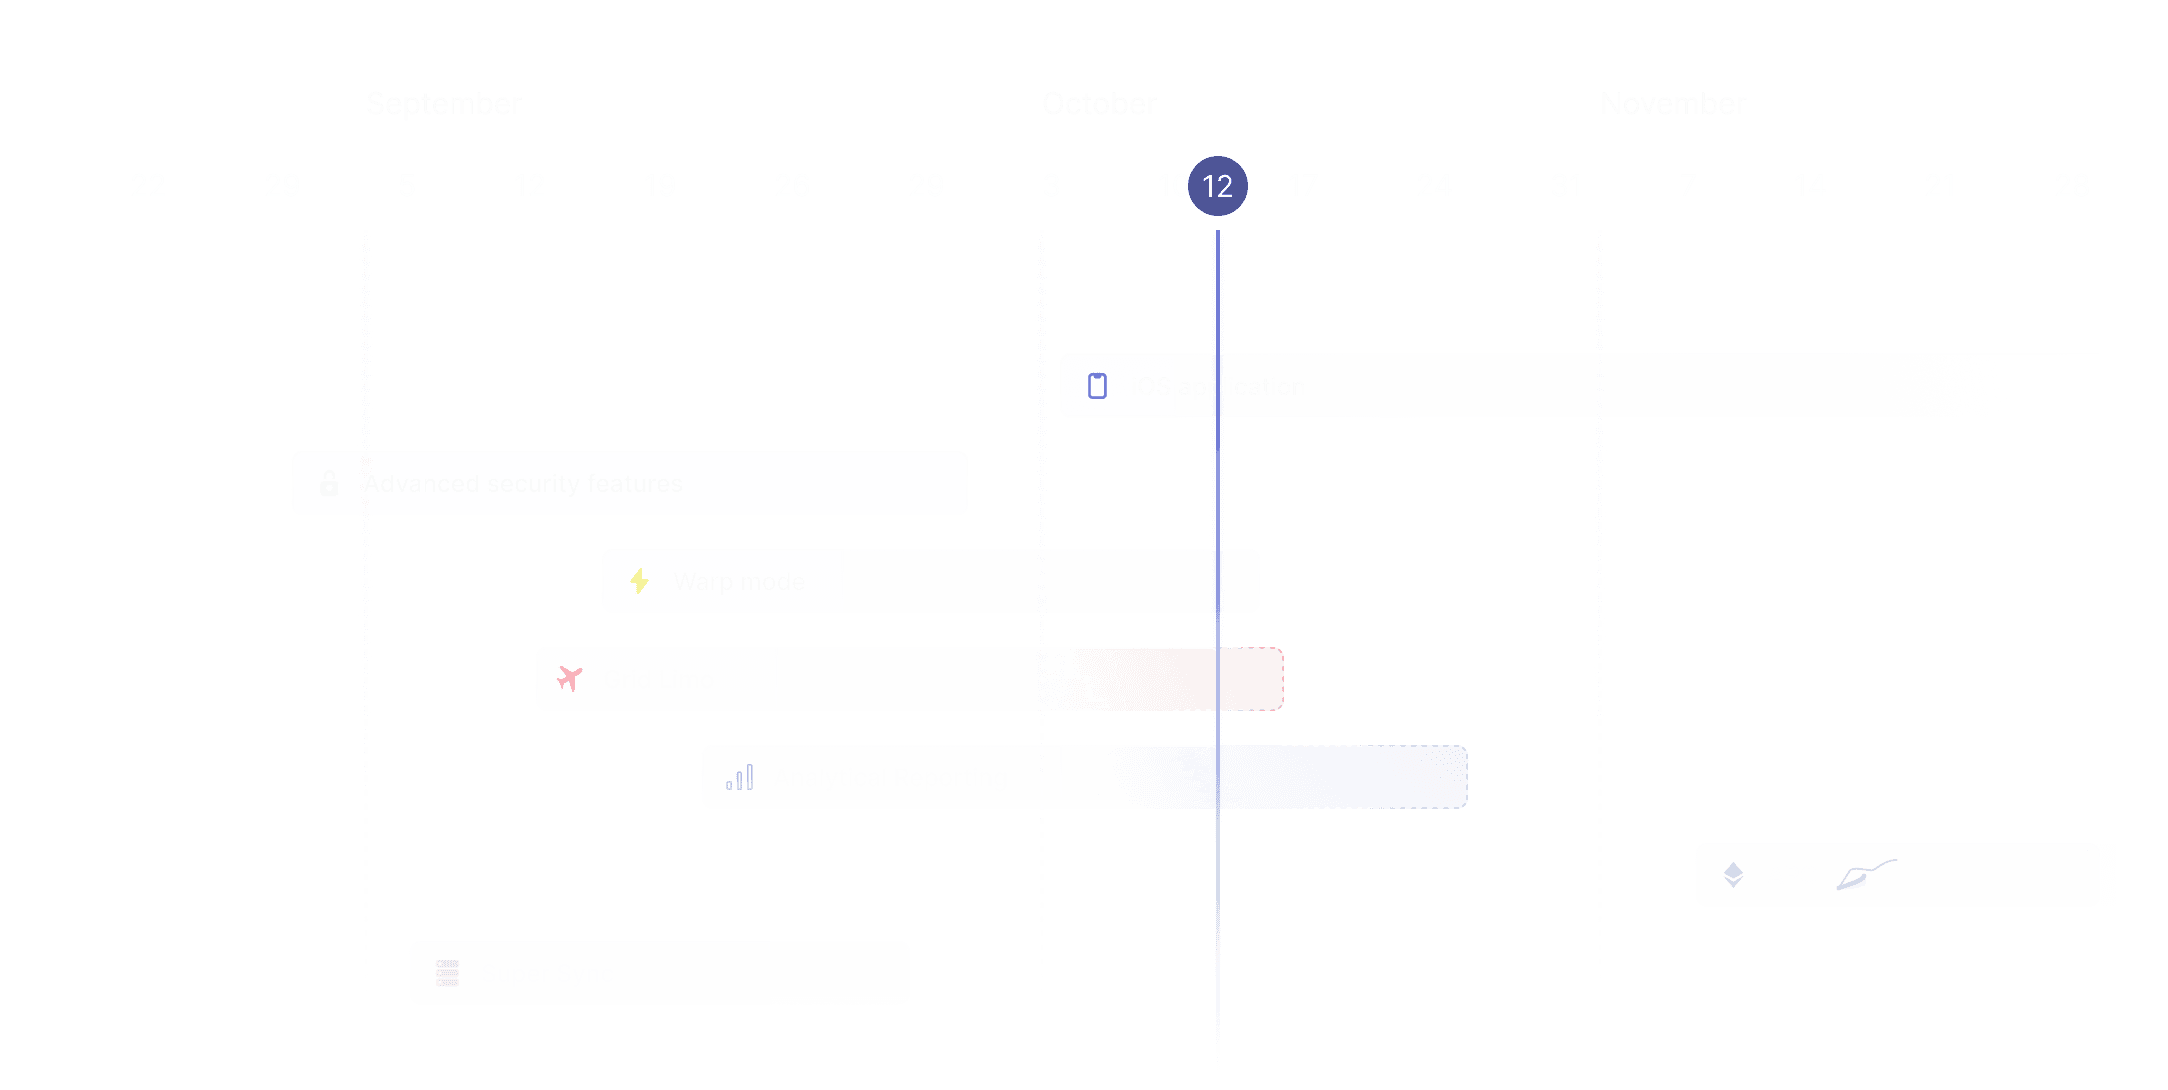 ReTrader's roadmap view in timeline mode, showing a list of projects and their associated start/end dates across the months of September, October, and November. Some of the project names are 'iOS app', 'advanced security features', 'wrap mode', and 'super sync'.